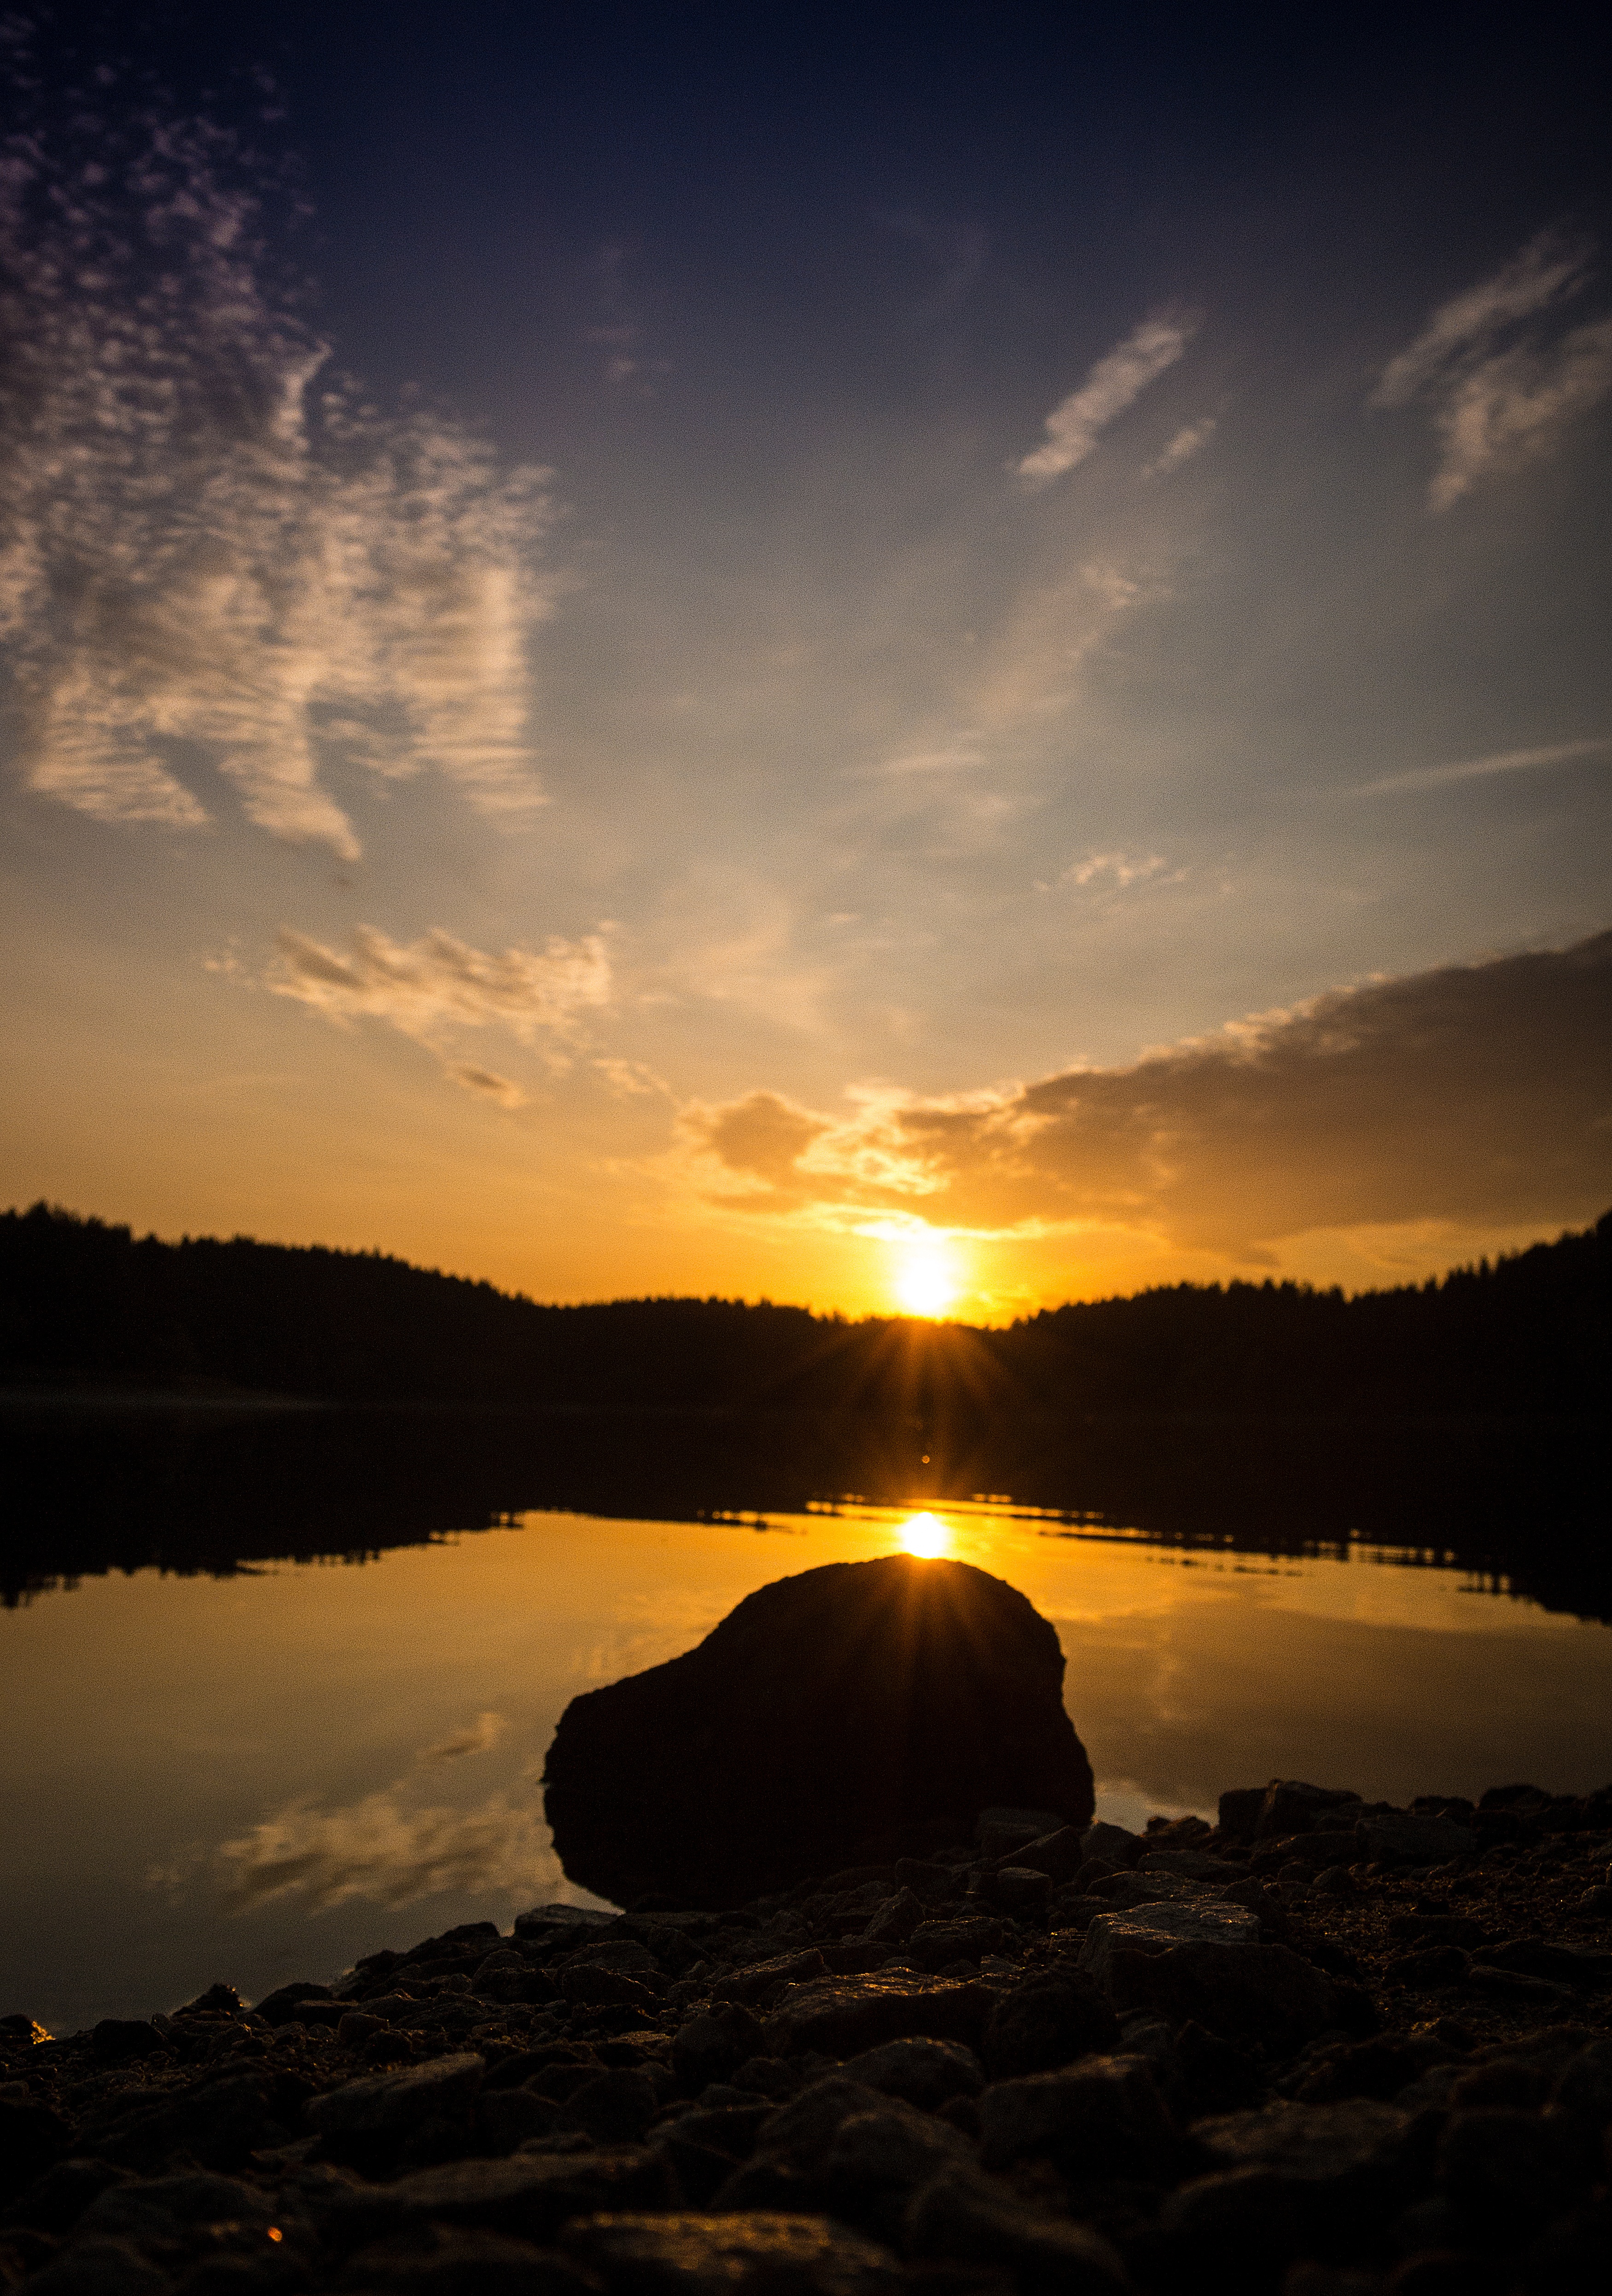 New Lock Screen Wallpapers stone, nature, sunset, sky, sun, rock, lake, reflection, shore, bank, forest